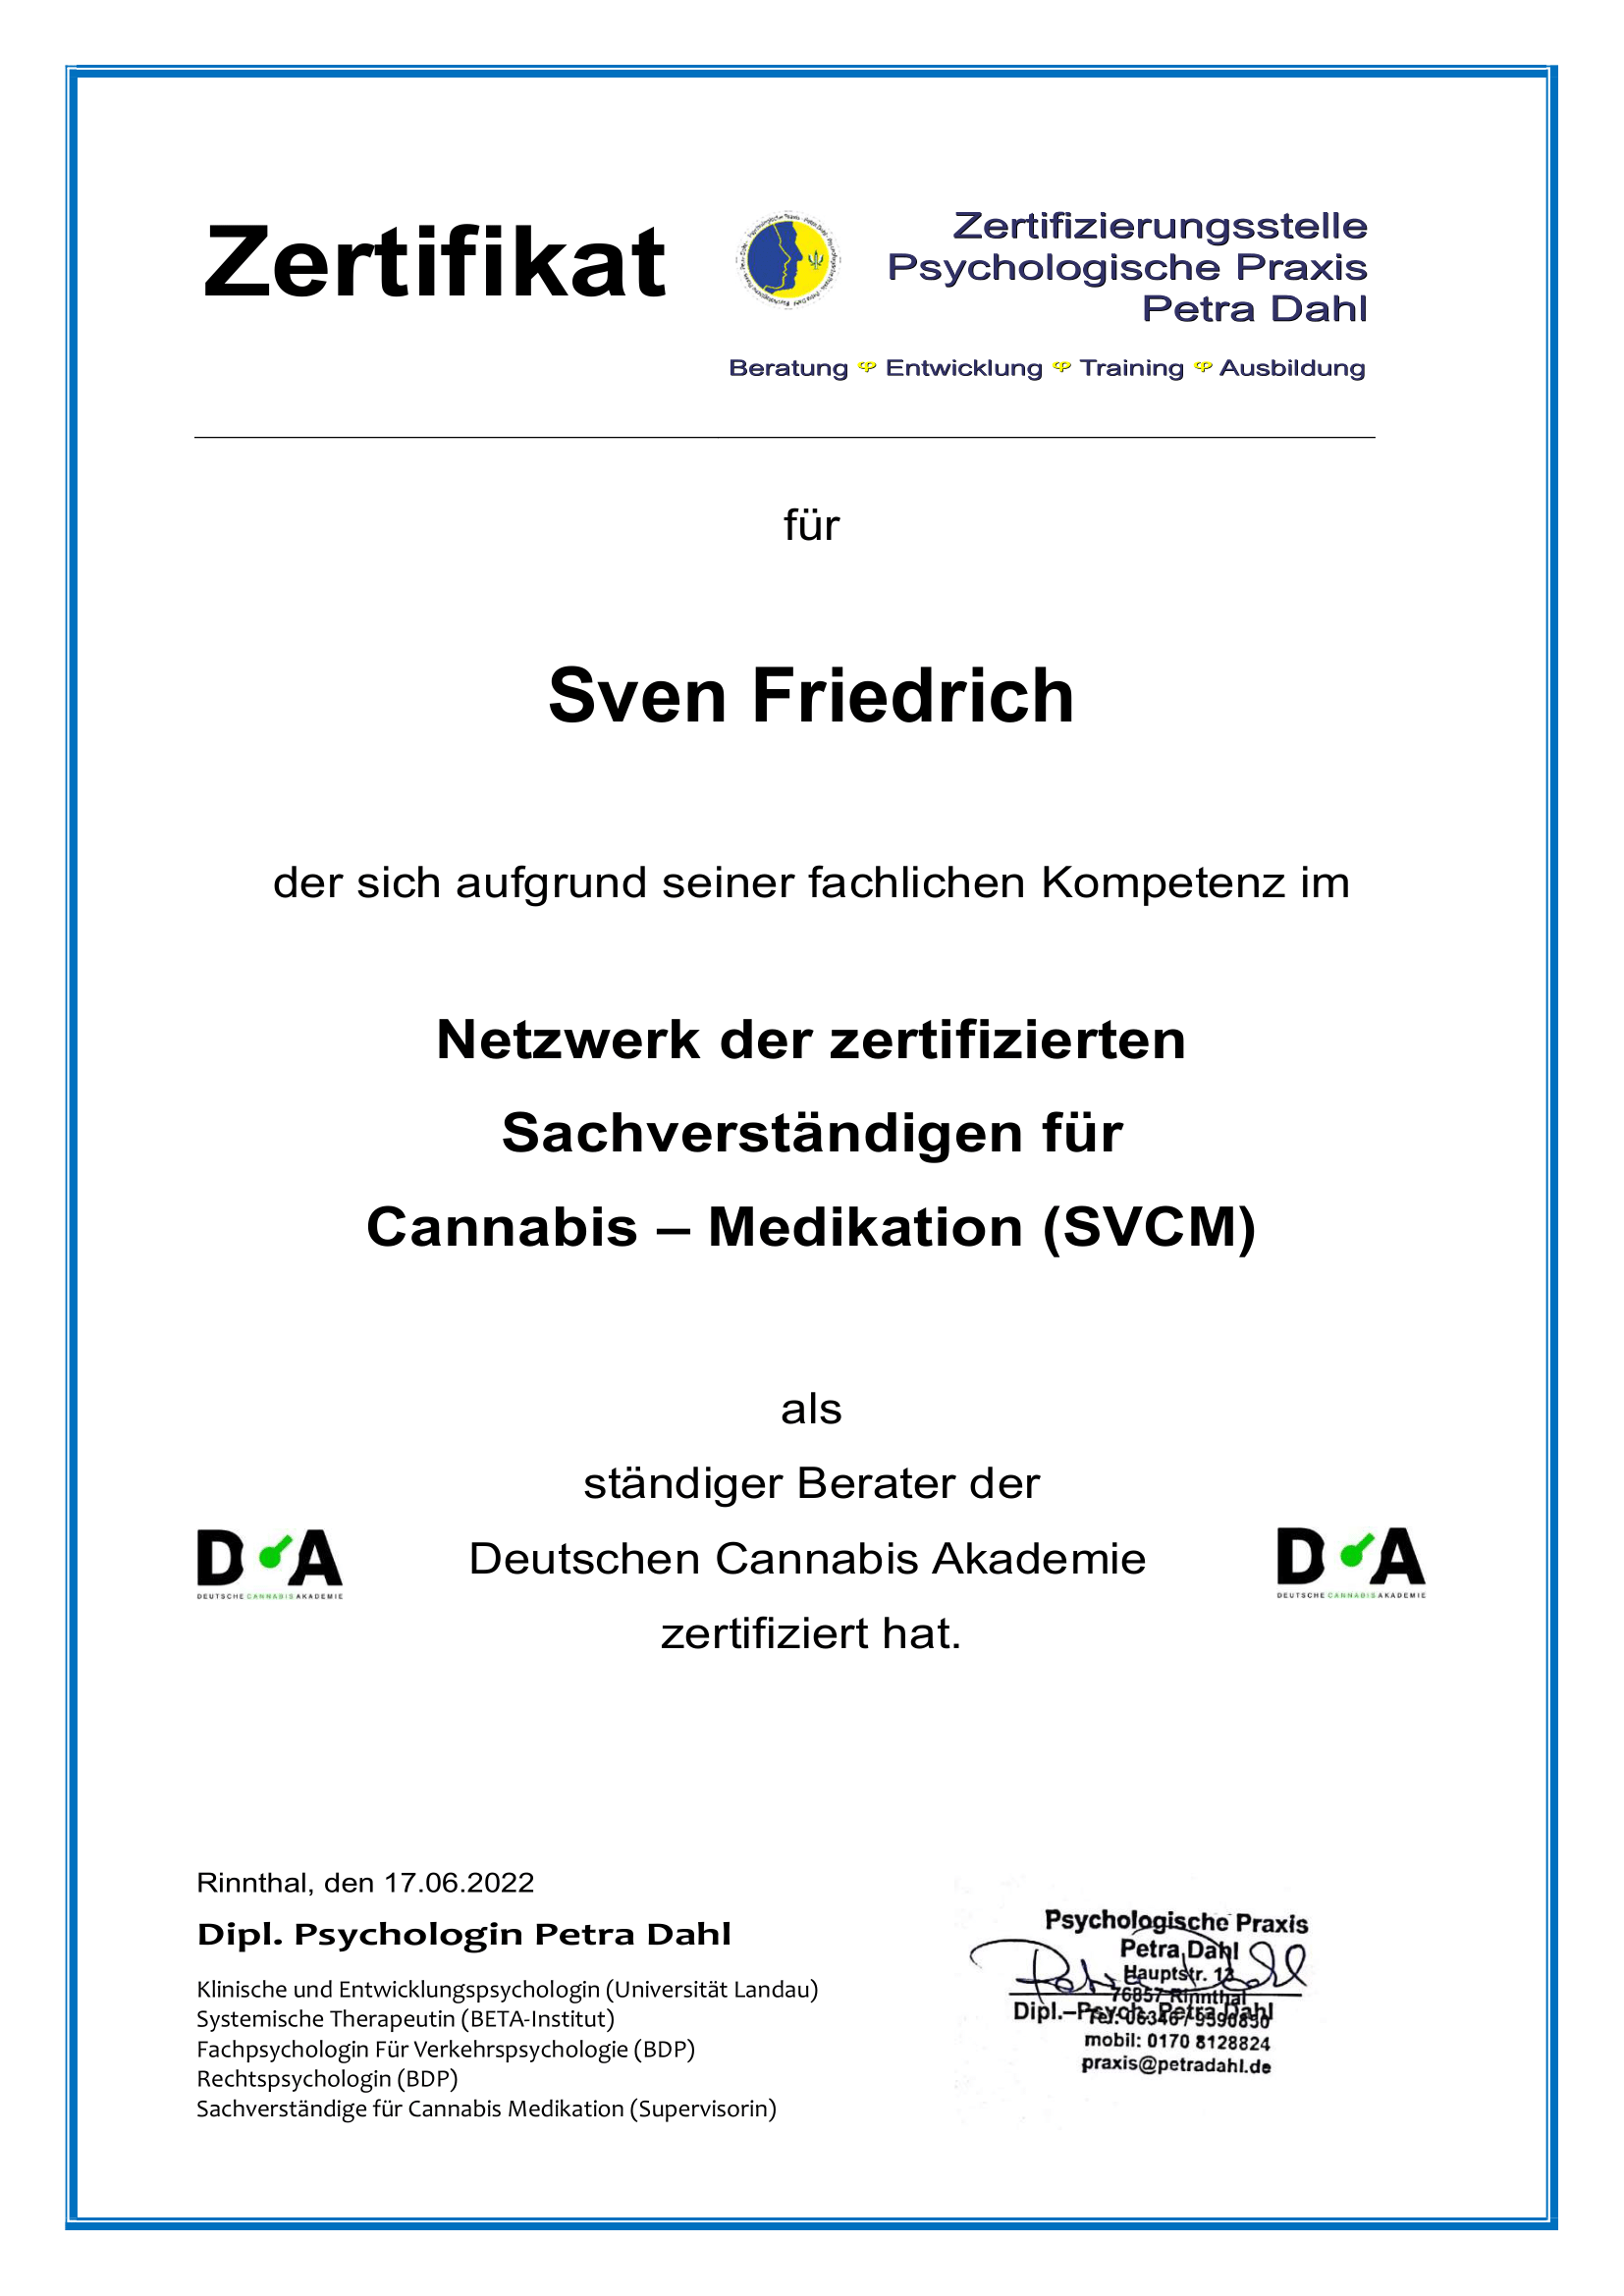 Certificate lecturer from the German Cannabis Academy